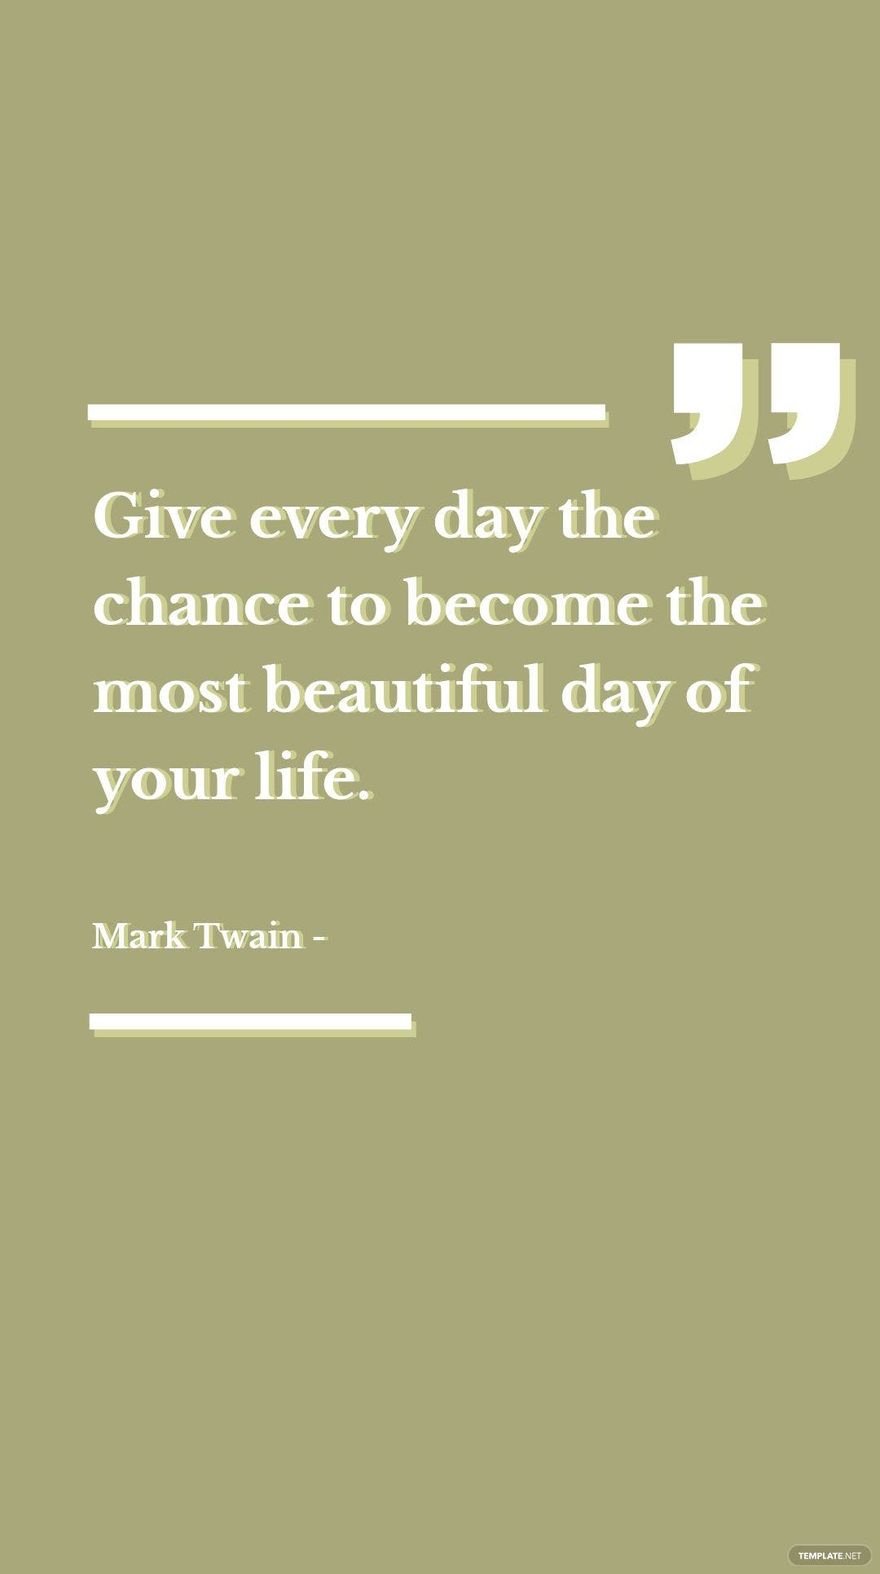 Mark Twain - Give every day the chance to become the most beautiful day of your life.